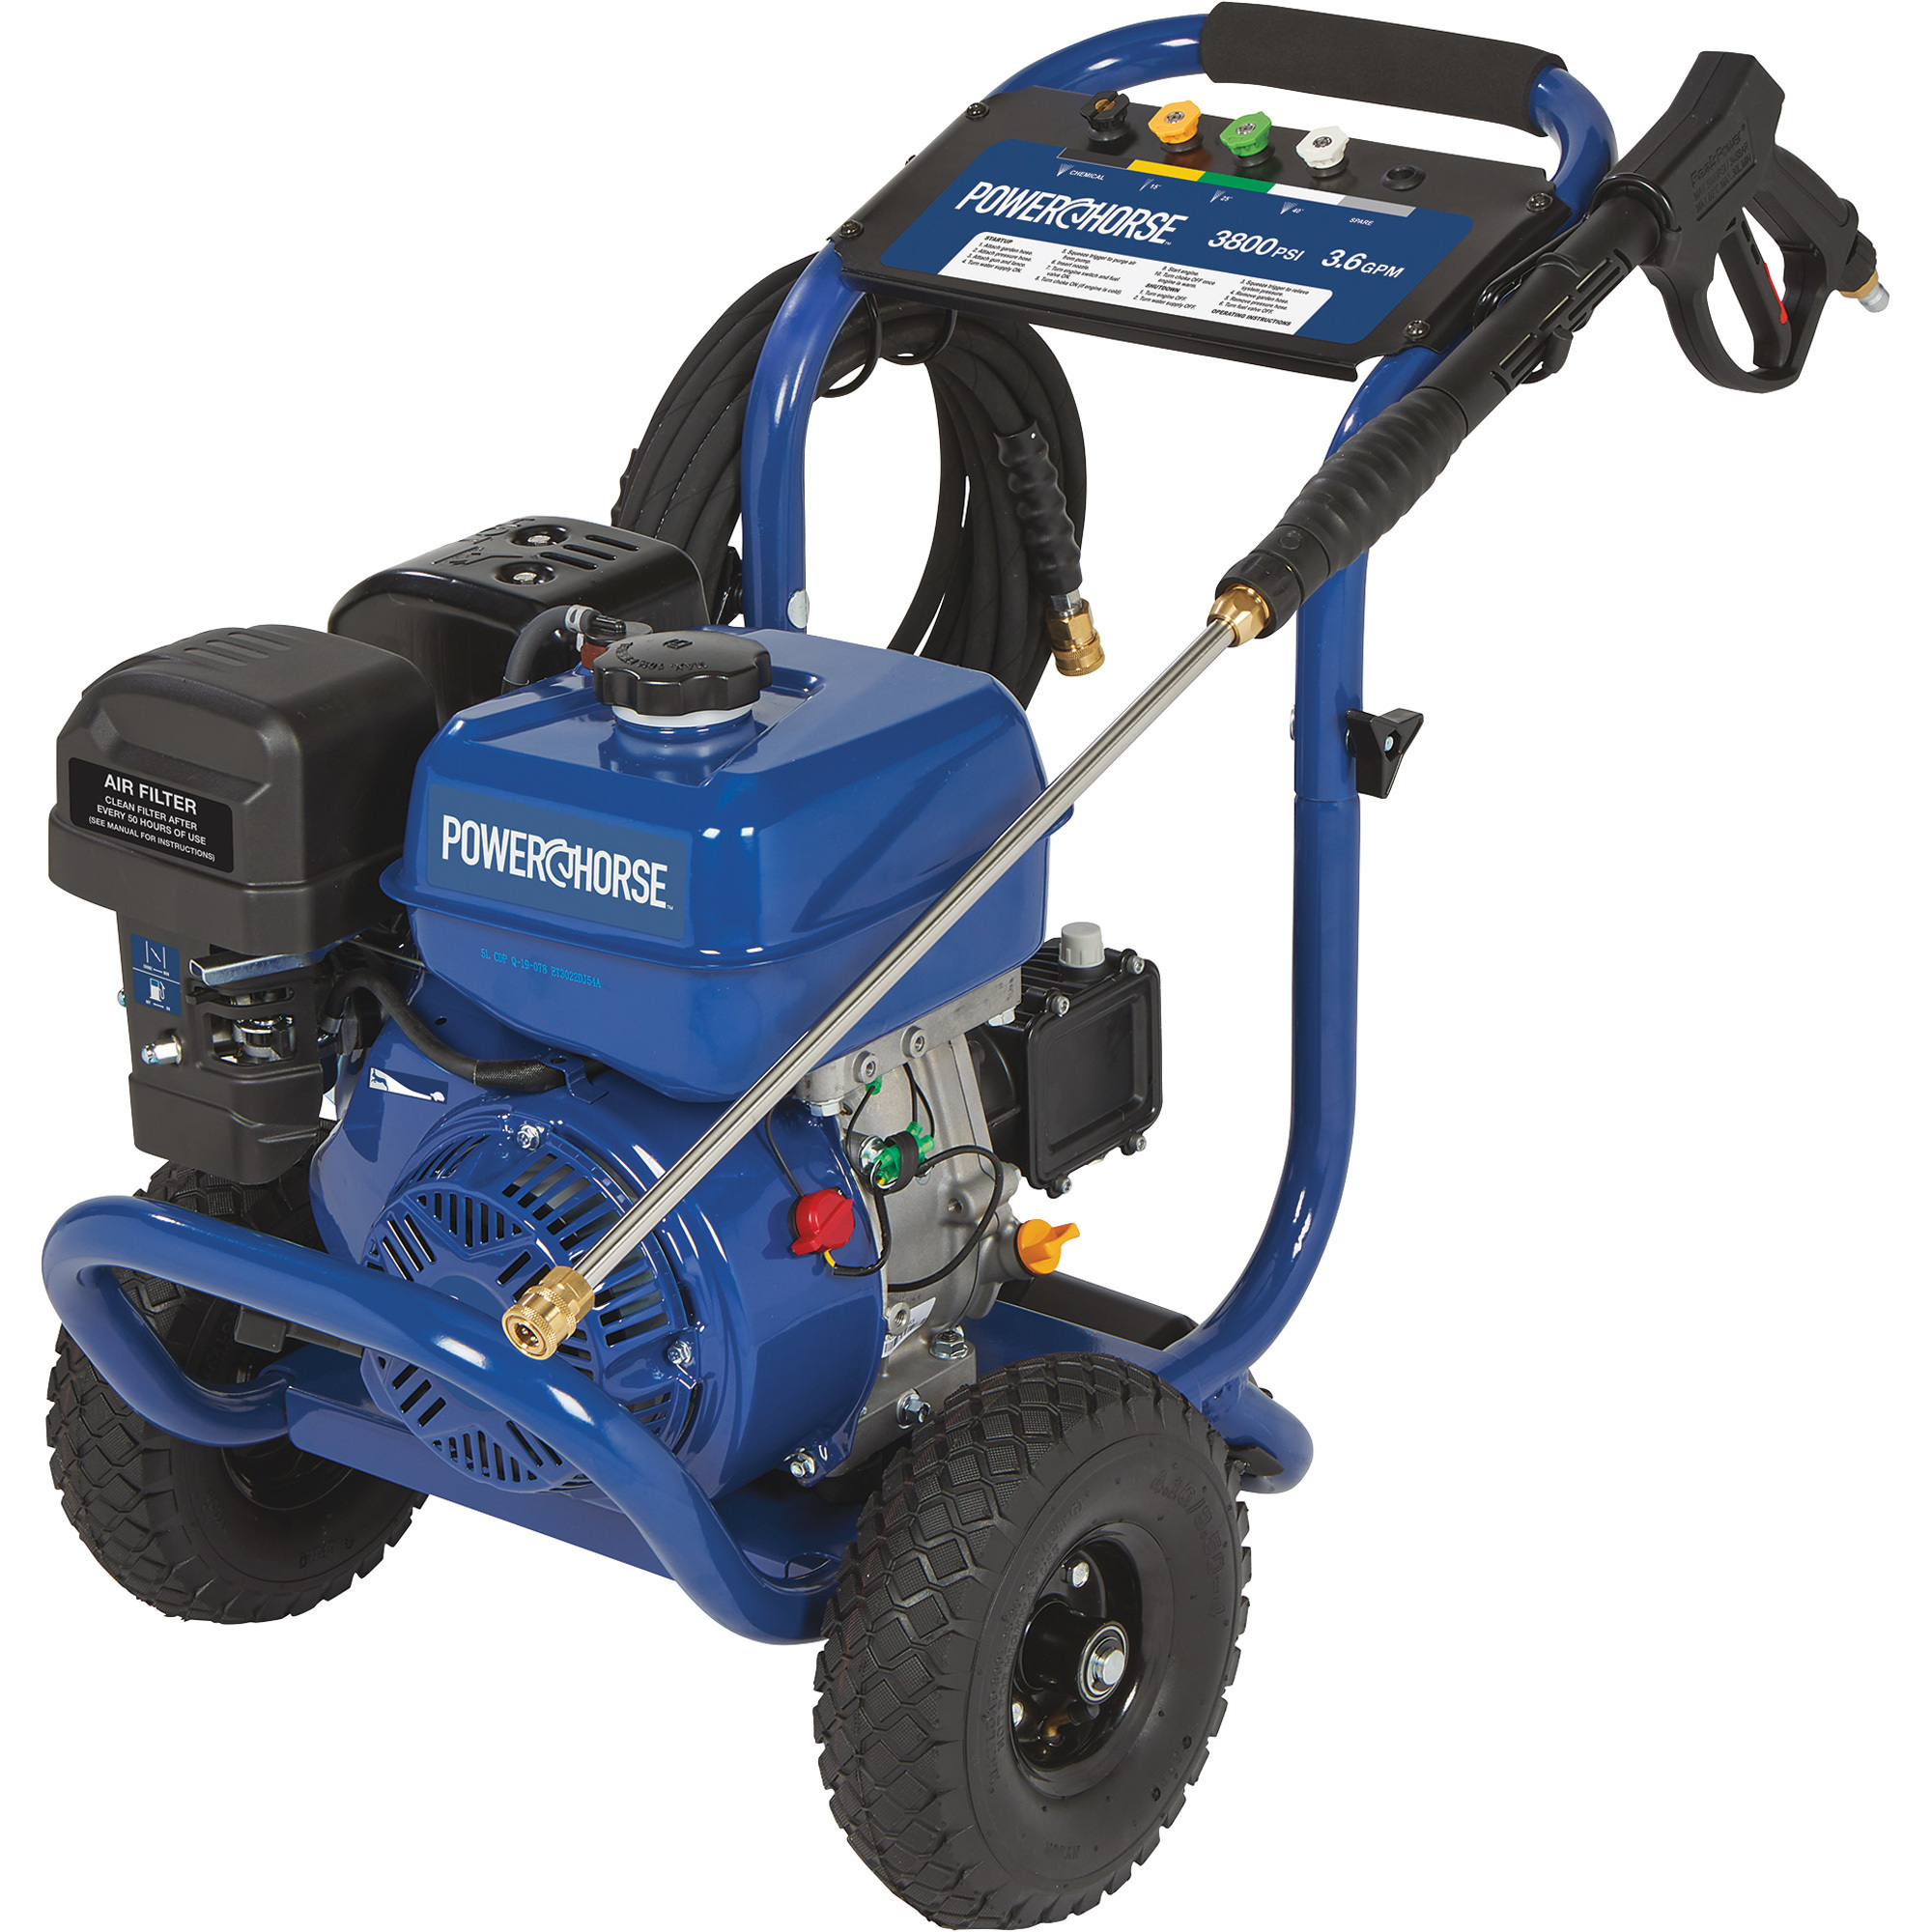 Powerhorse Gas Cold Water Pressure Washer, 3800 PSI, 3.6 GPM